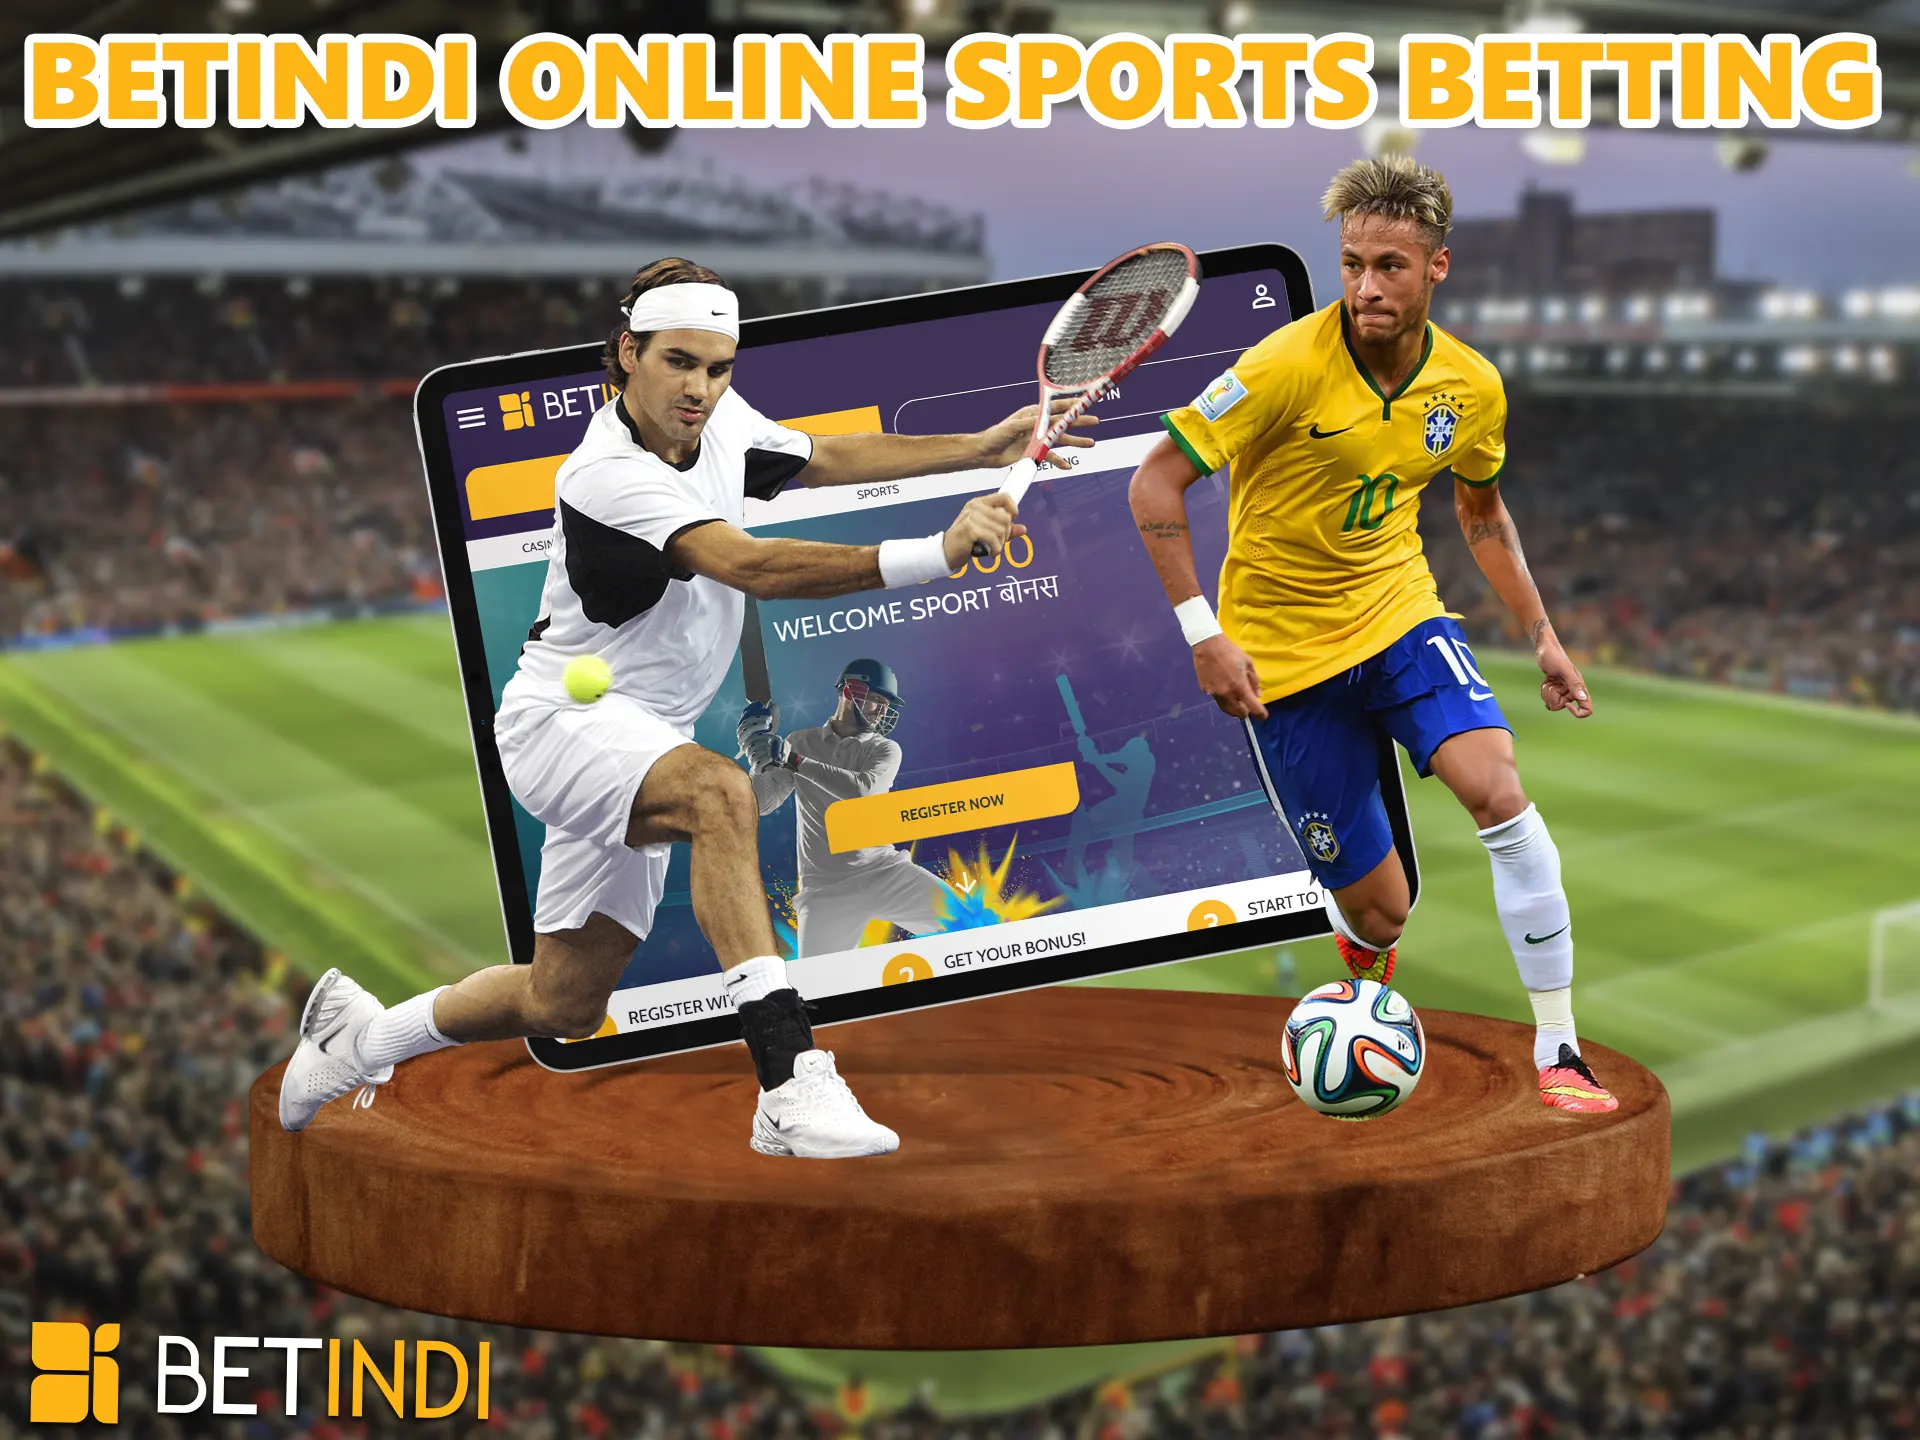 Players BetIndi betting site waiting for more than 25 sports, all of them can be placed bets online at any time from anywhere.